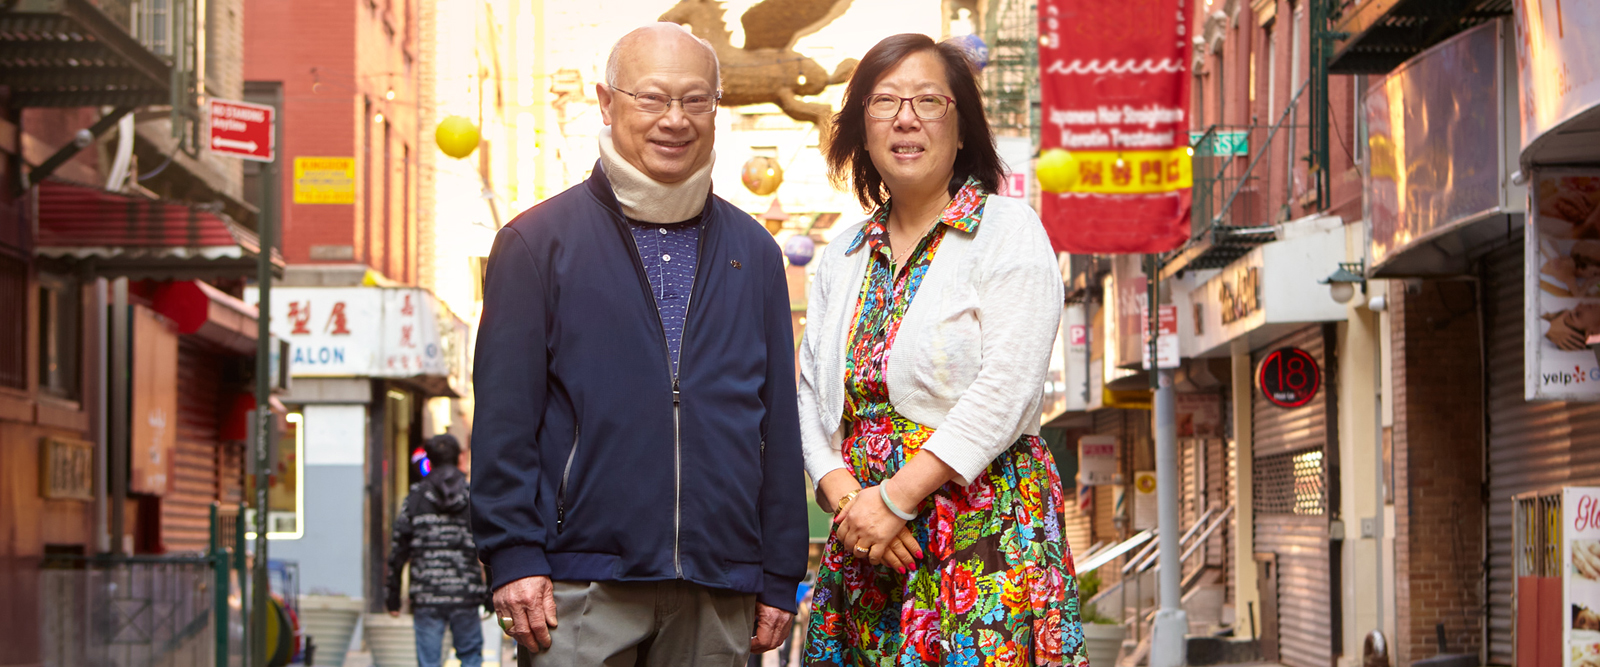 Dr. Eric Poon, pediatrician and co-founder of NewYork-Presbyterian Lower Manhattan Hospital's Chinese Community Partnership for Health (CCPH), and Chui Man Lai, Chui Man Lai, community affairs manager at NewYork-Presbyterian Lower Manhattan Hospital.